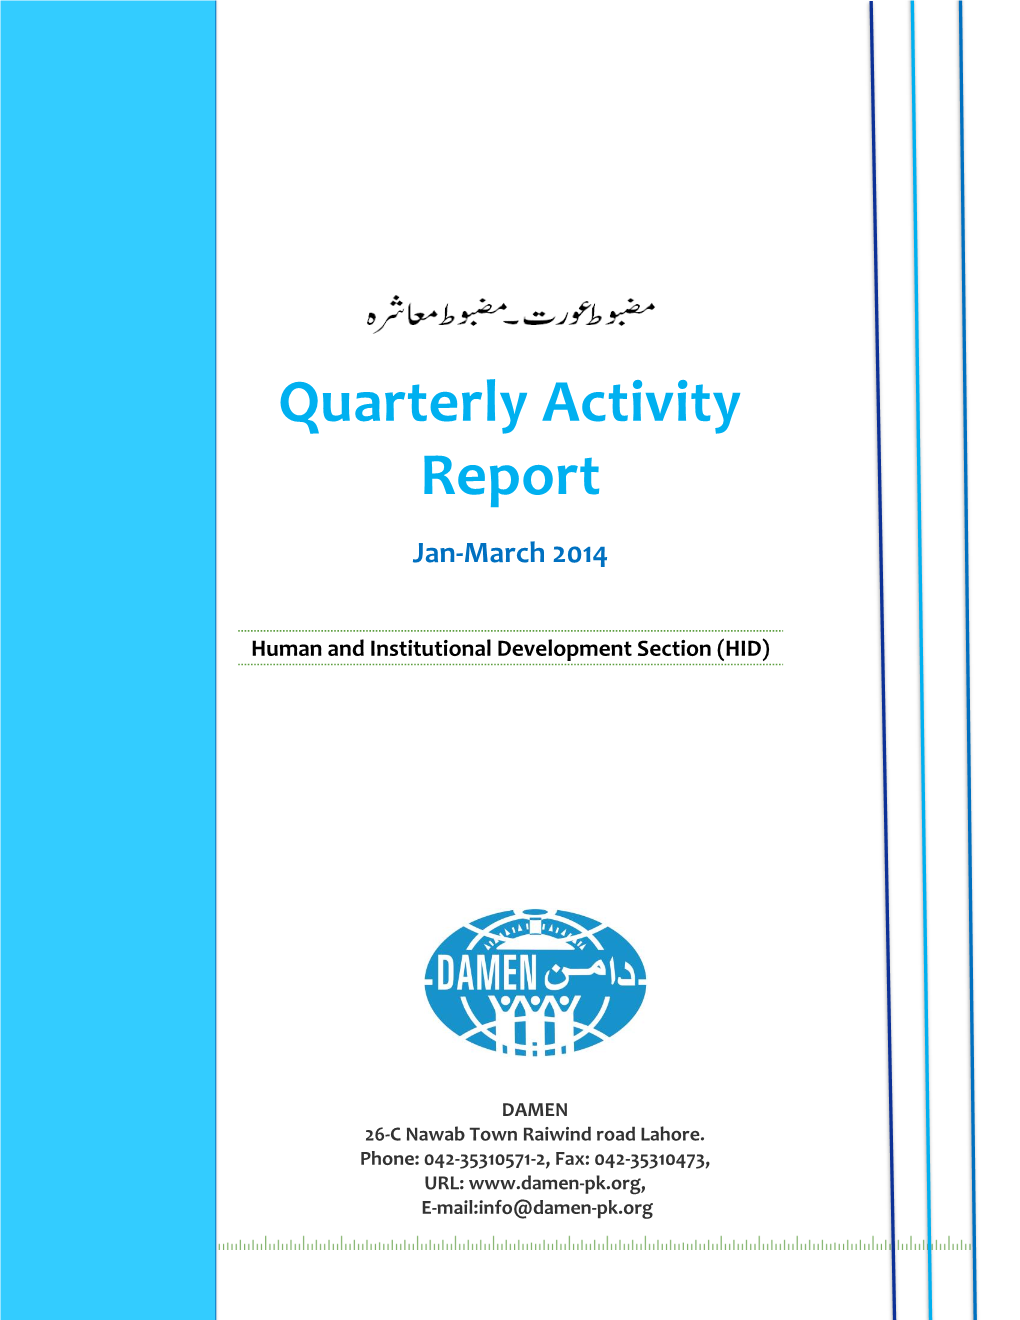 Quarterly Activity Report Jan-March 2014